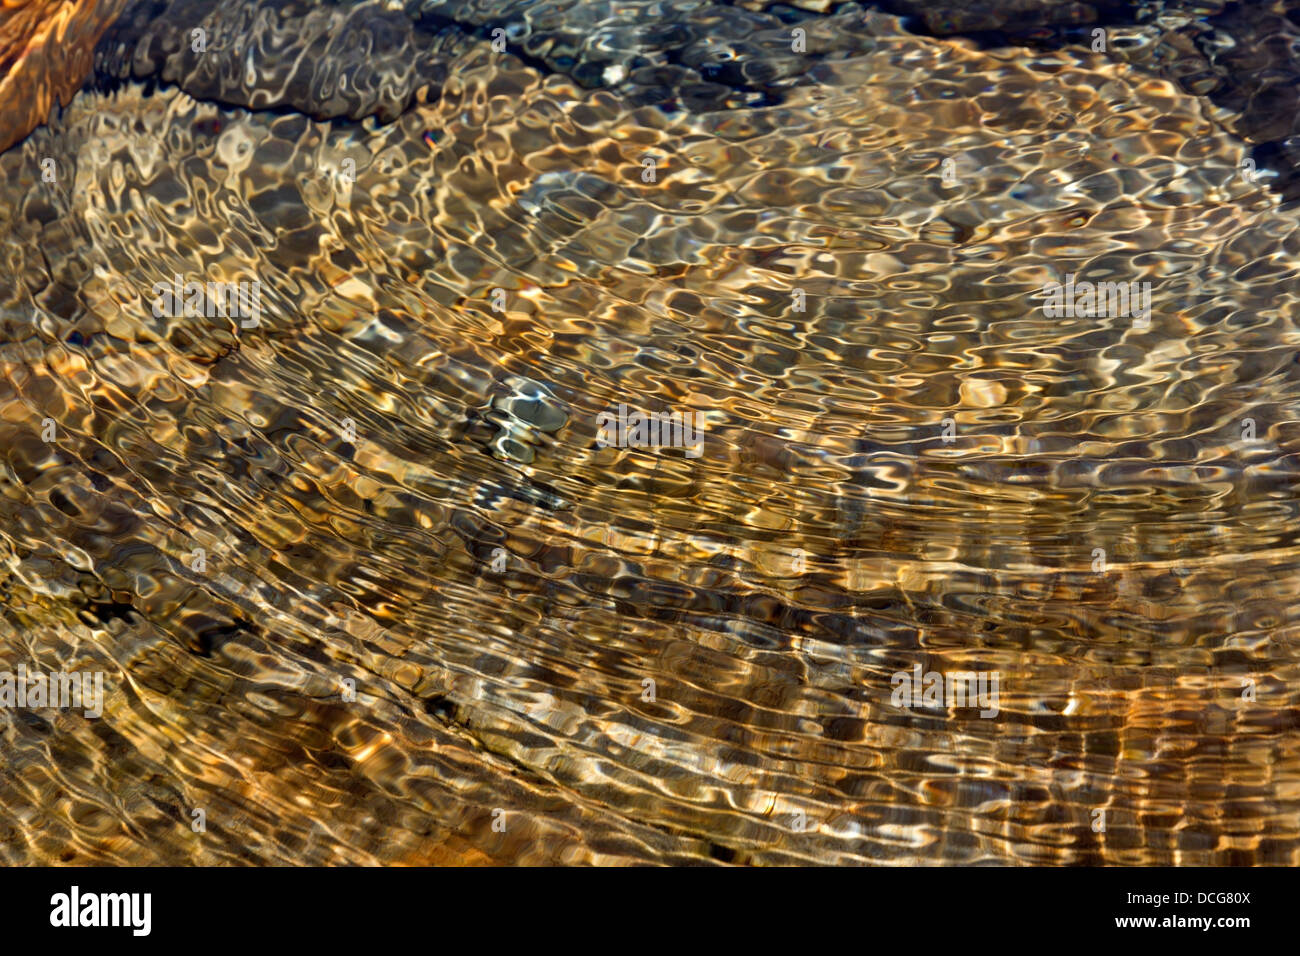 Colourful golden abstract circular water ripples above sunlit rocky stream bed, UK Stock Photo